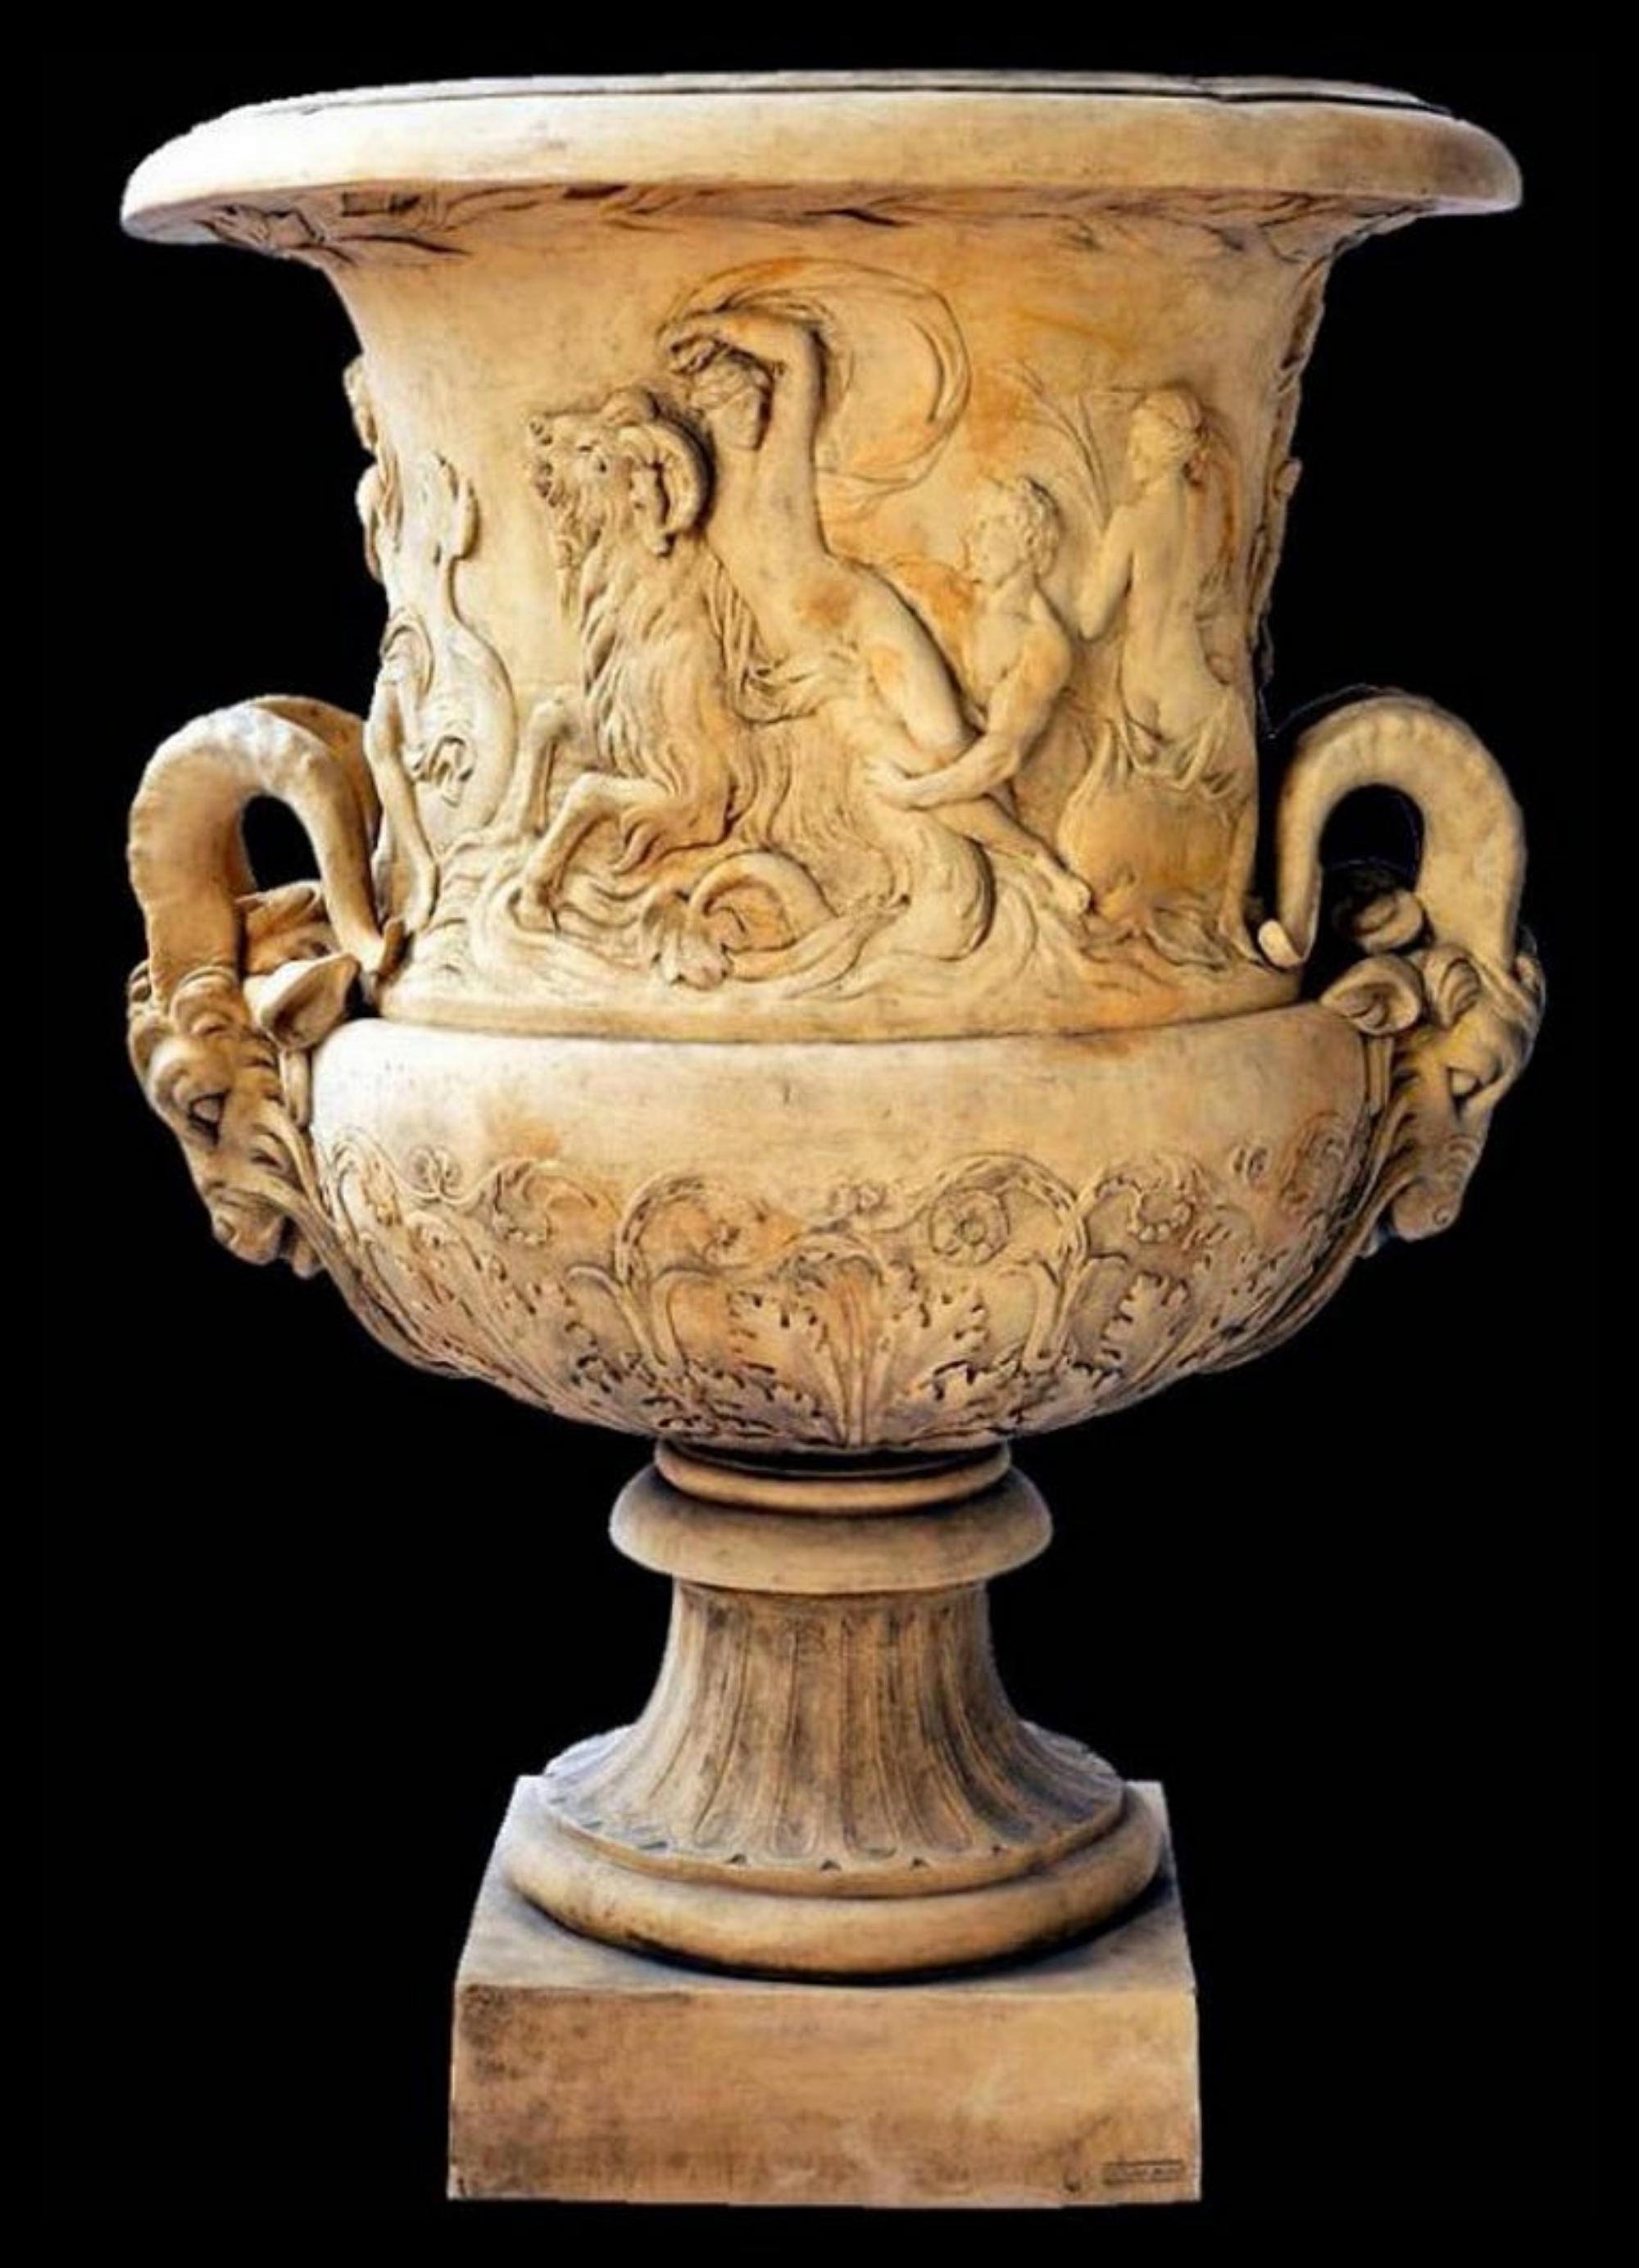 Amphitrite vase, 'Louvre Collection' early 20th century.

Large vases of French origin.
Originals owned by the Louvre Museum.
This is a vase sculpted by Girardon, first sculptor of King Louis XIV, made for the palace of Versailles.

Measures: